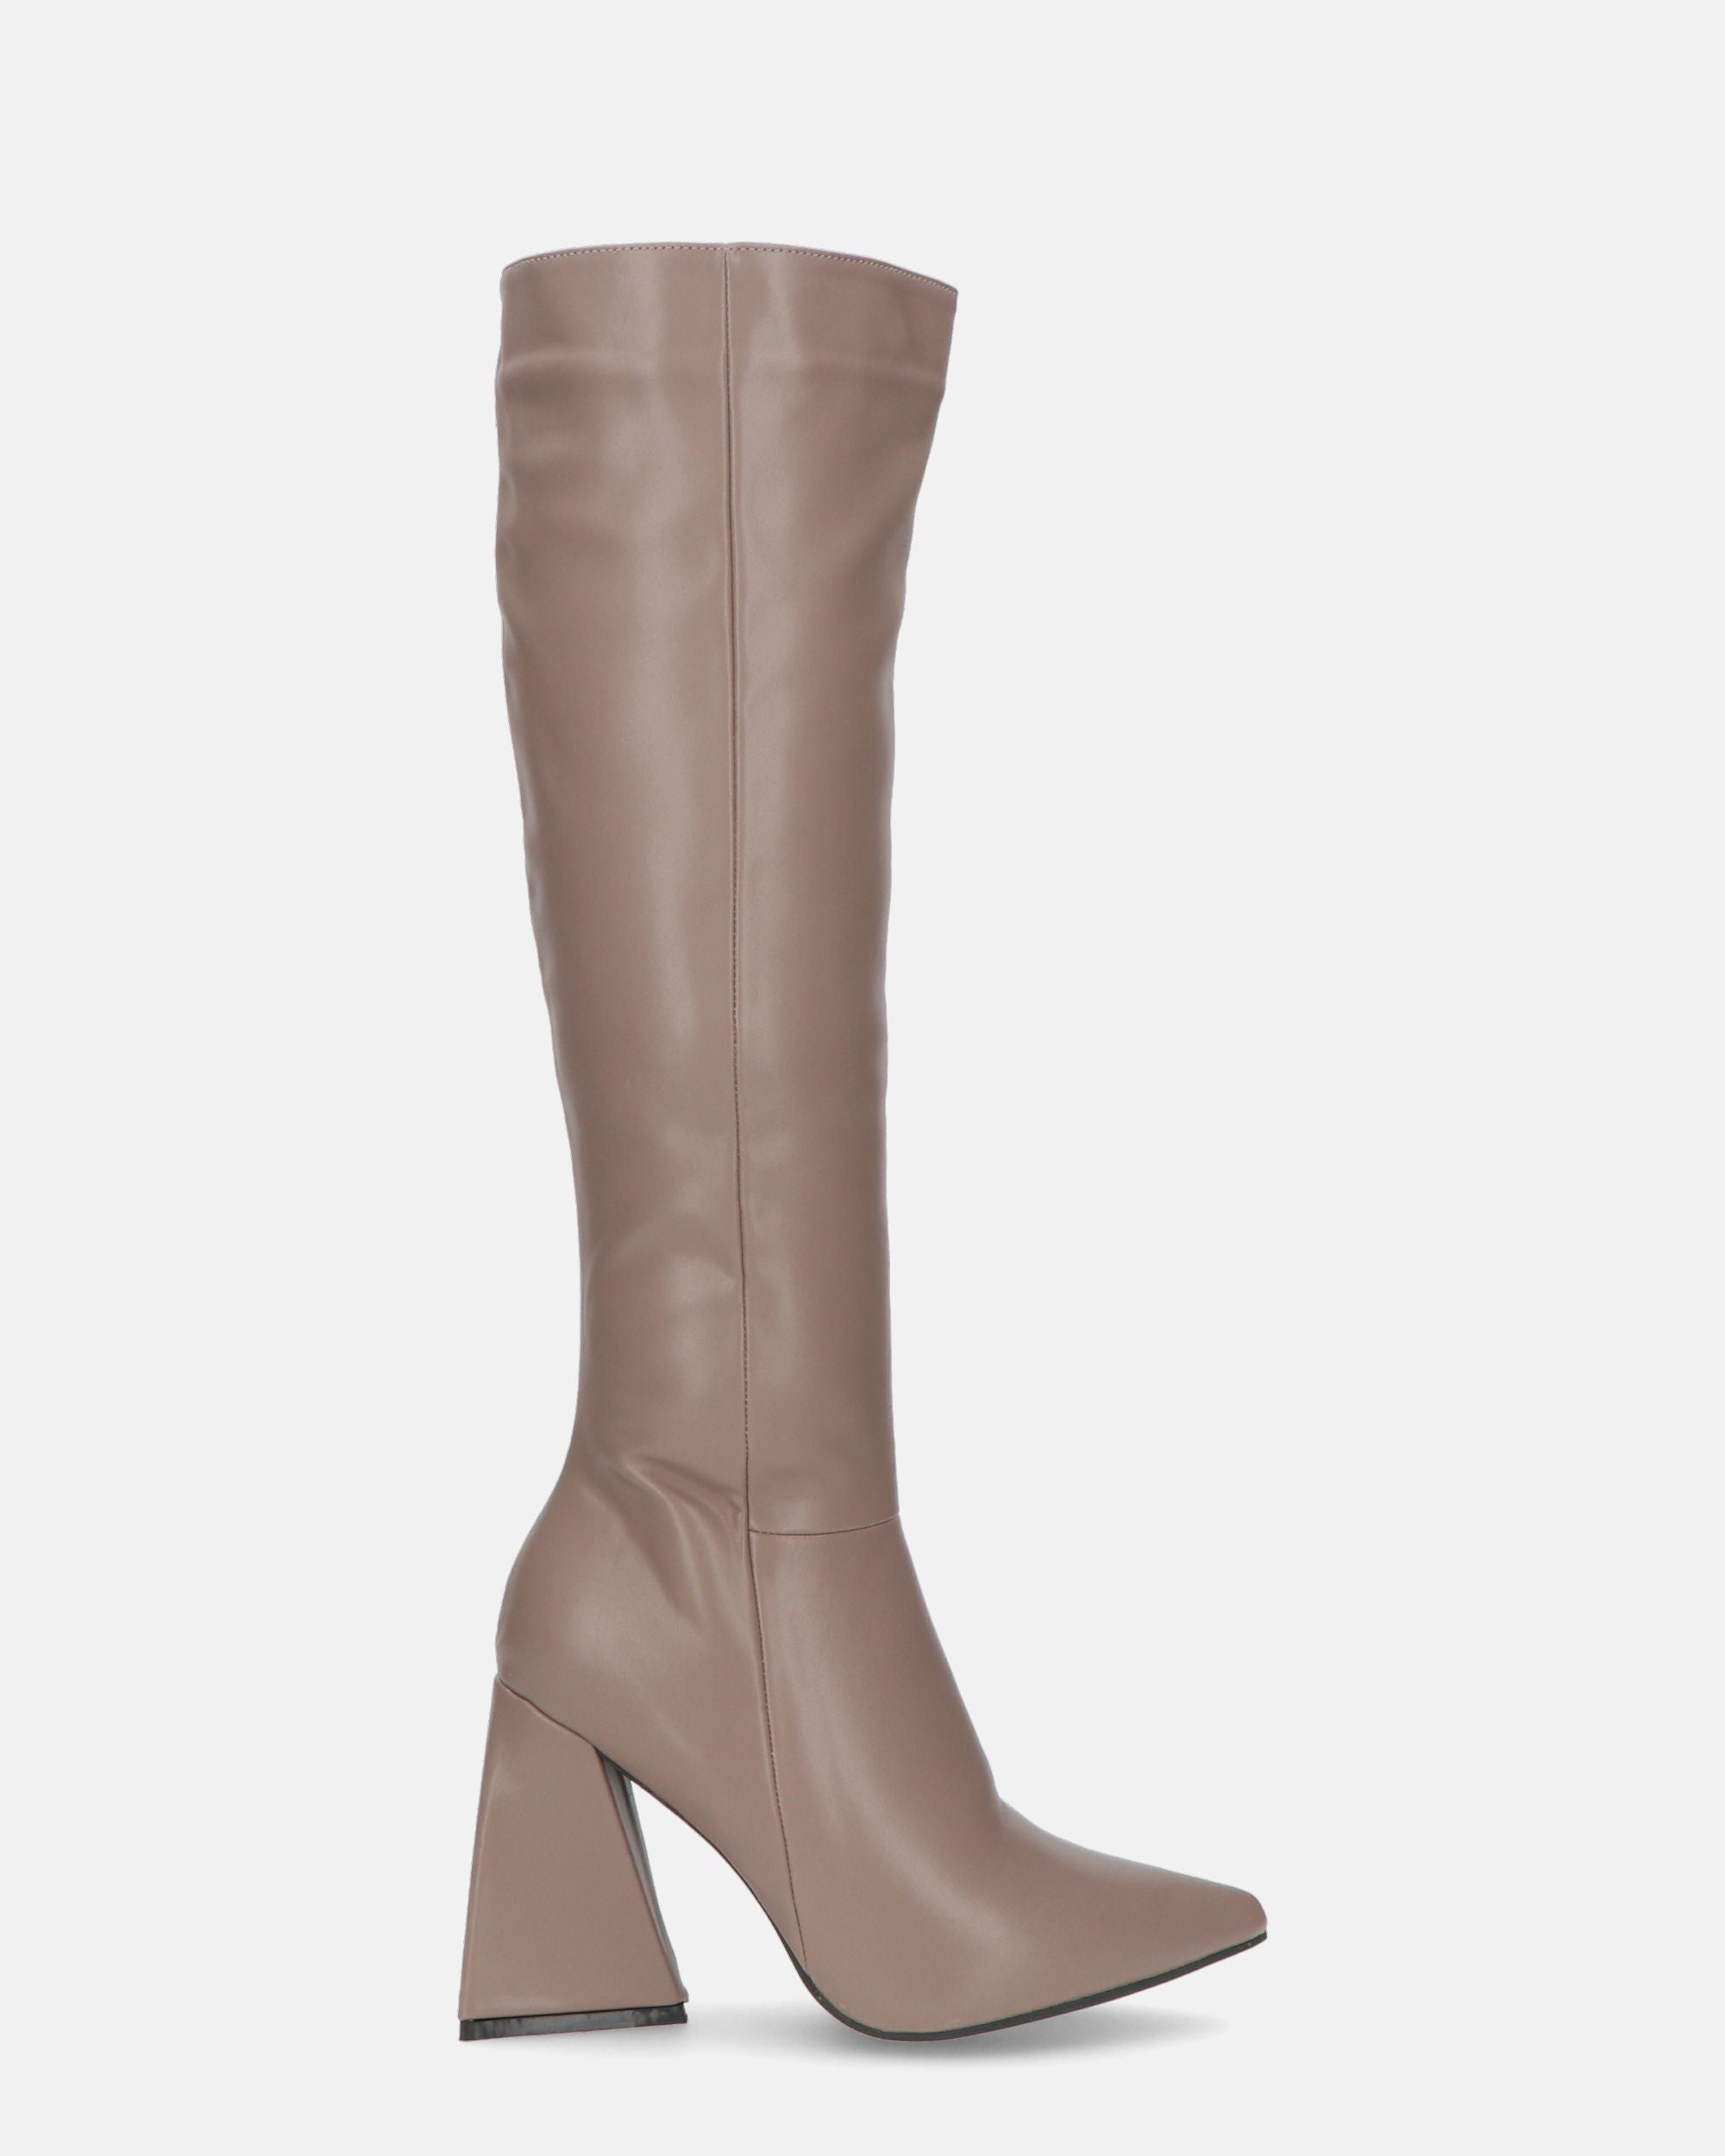 TRUDY - high-heeled boots in gray PU